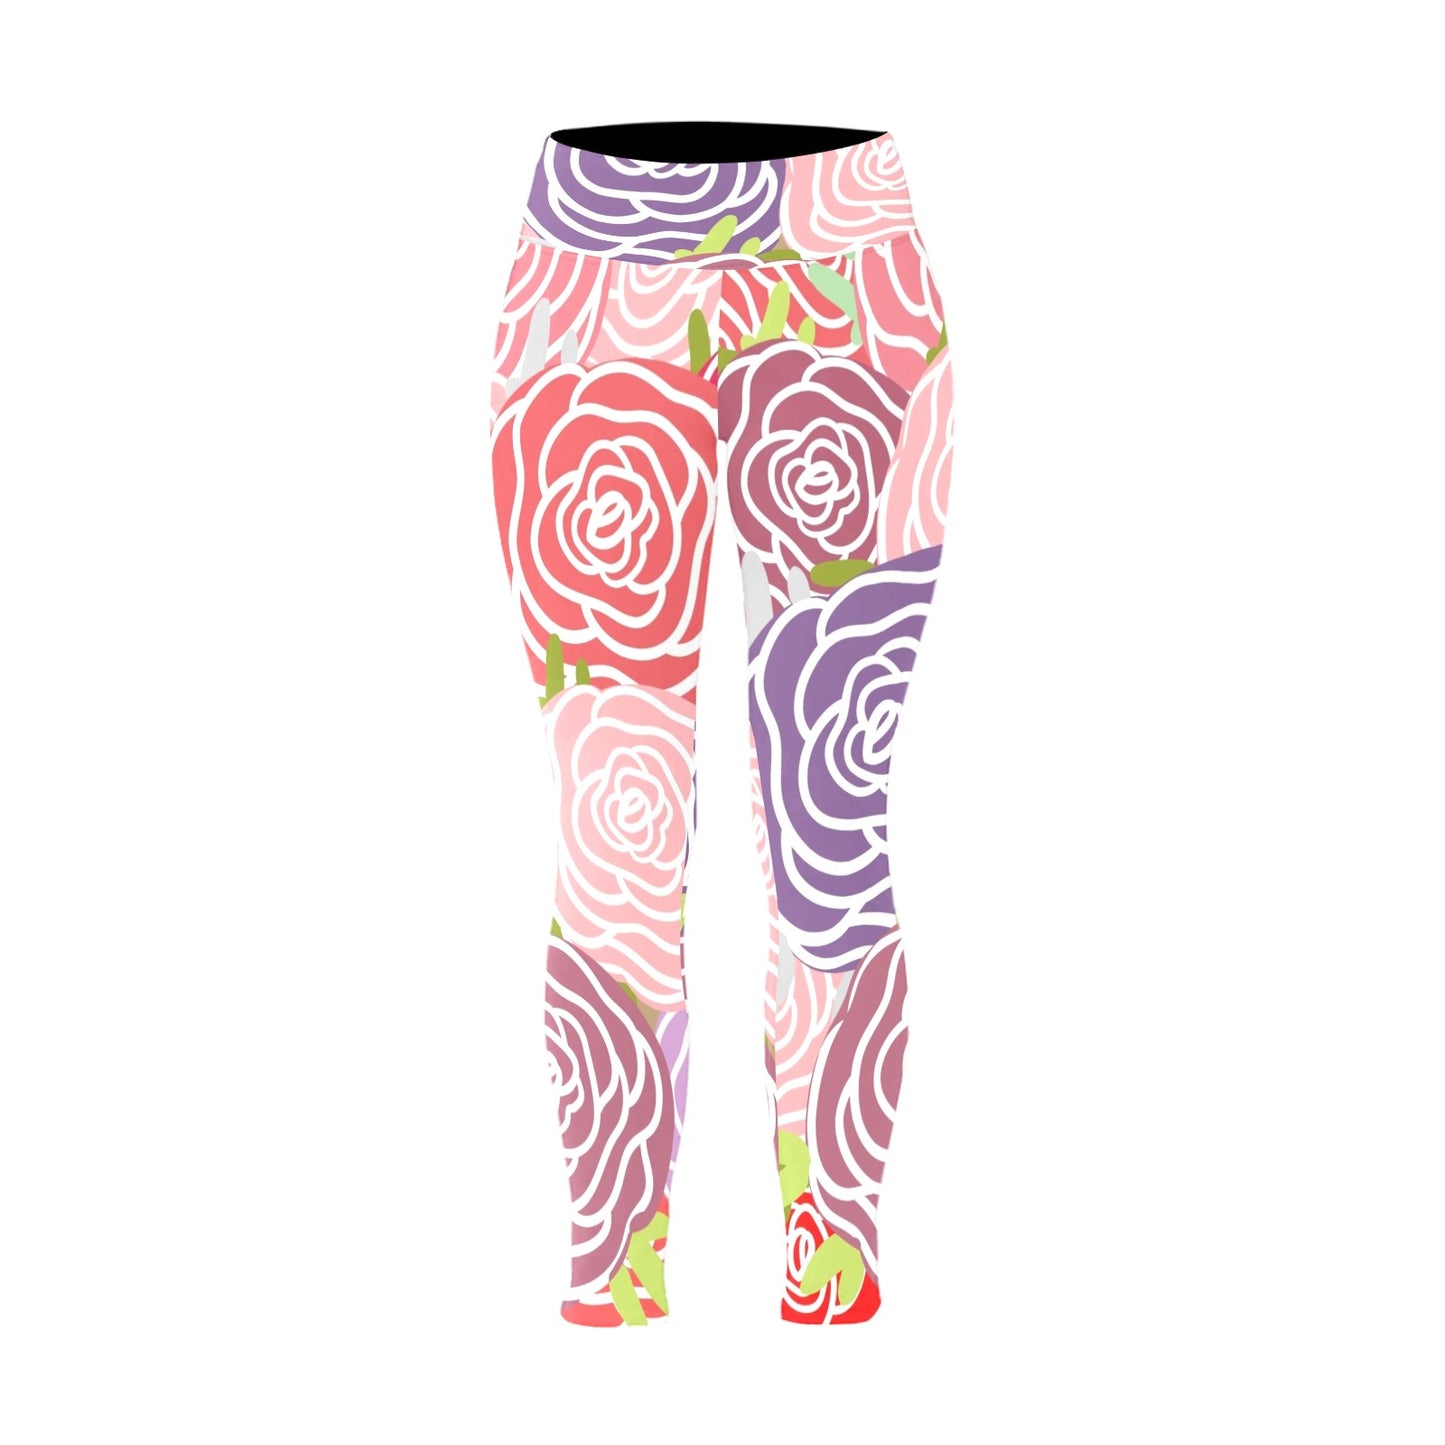 Abstract Roses - Women's Plus Size High Waist Leggings Women's Plus Size High Waist Leggings